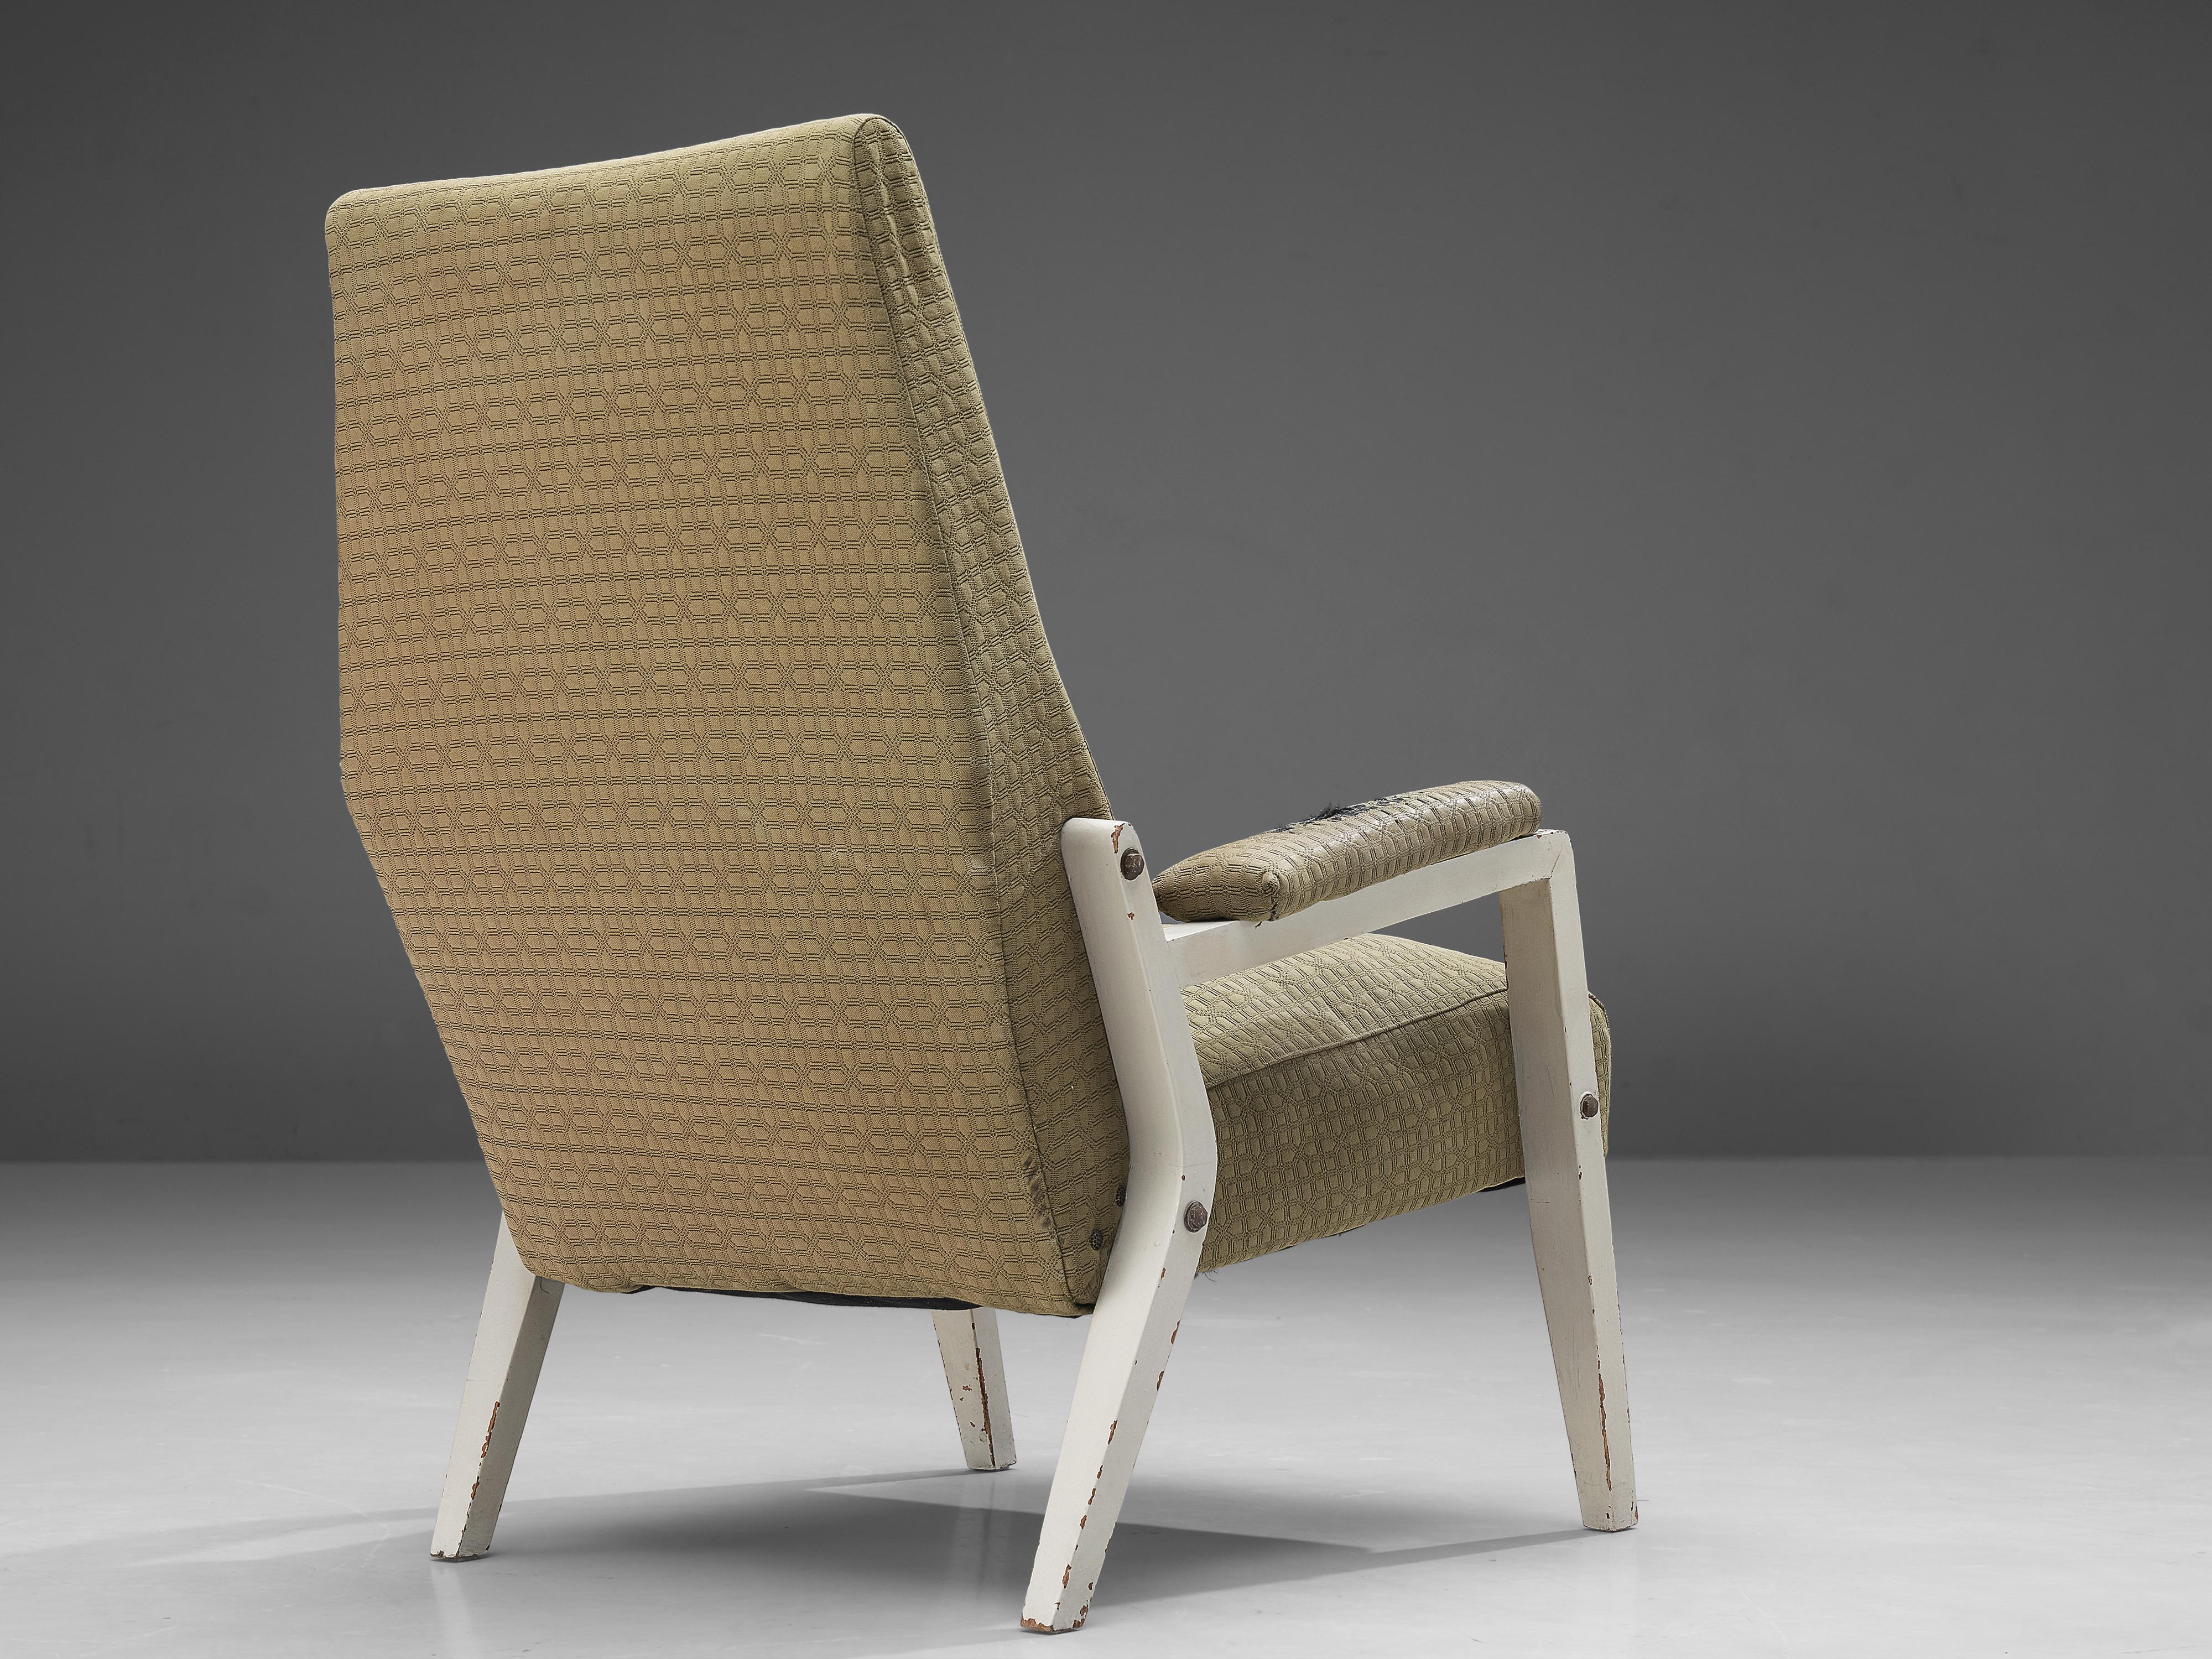 Mid-20th Century Italian Lounge Chair in Patterned Green Upholstery